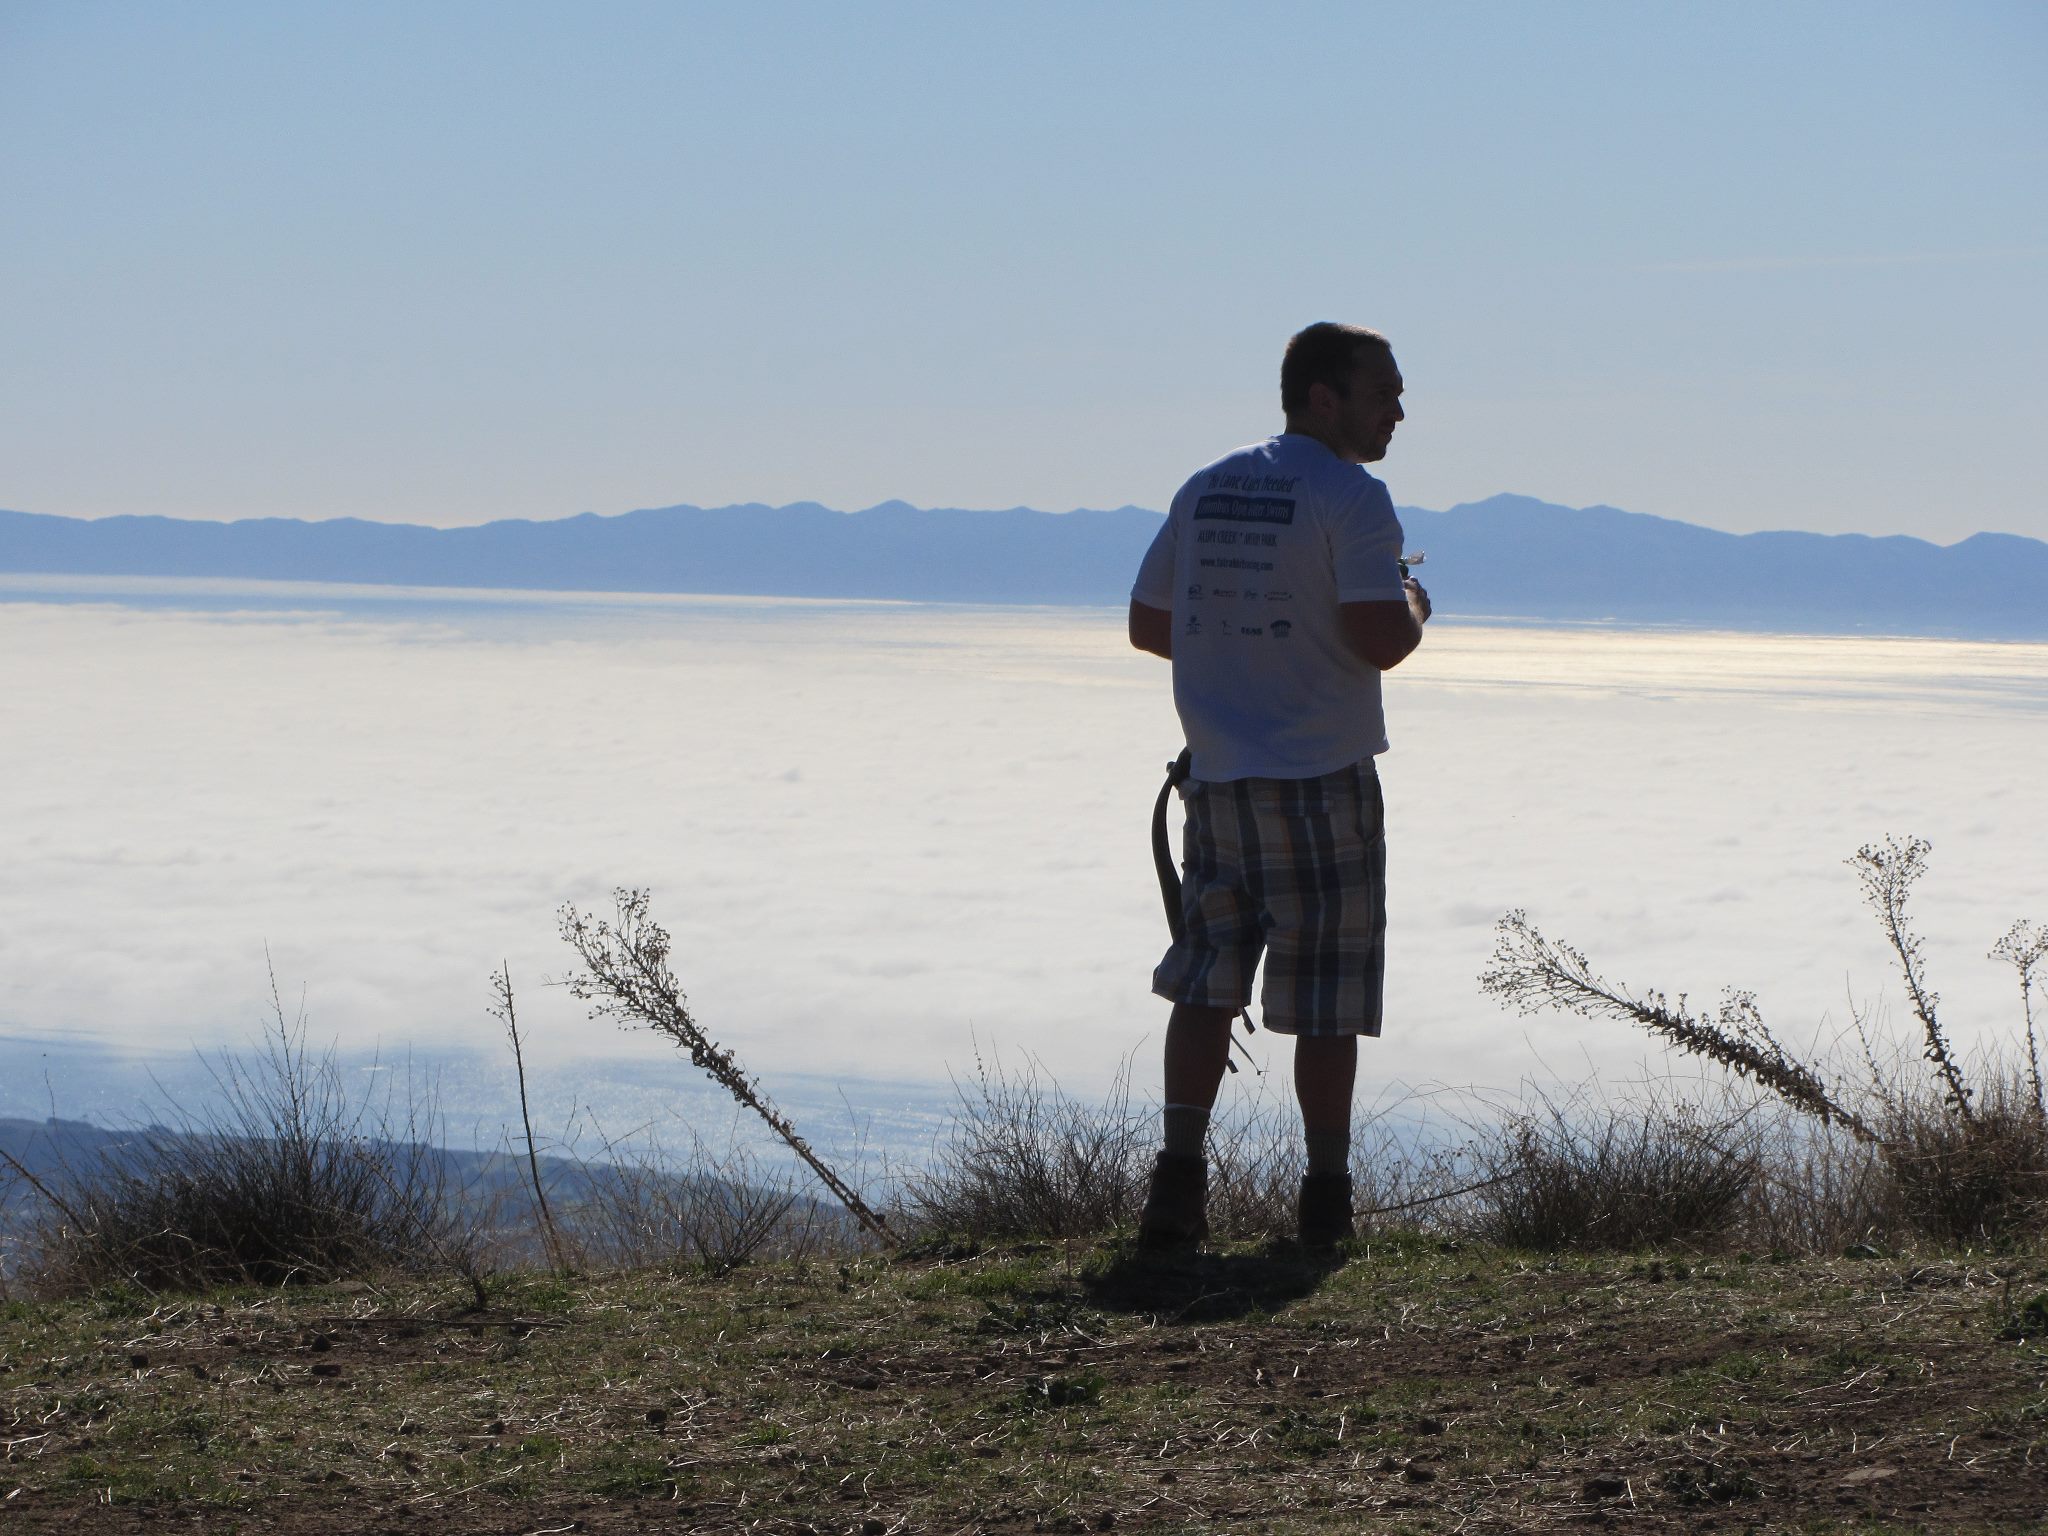 Looking out at Santa Cruz Island from the mountains above Goleta. New Year's Day 2012. Photo by Vanessa.